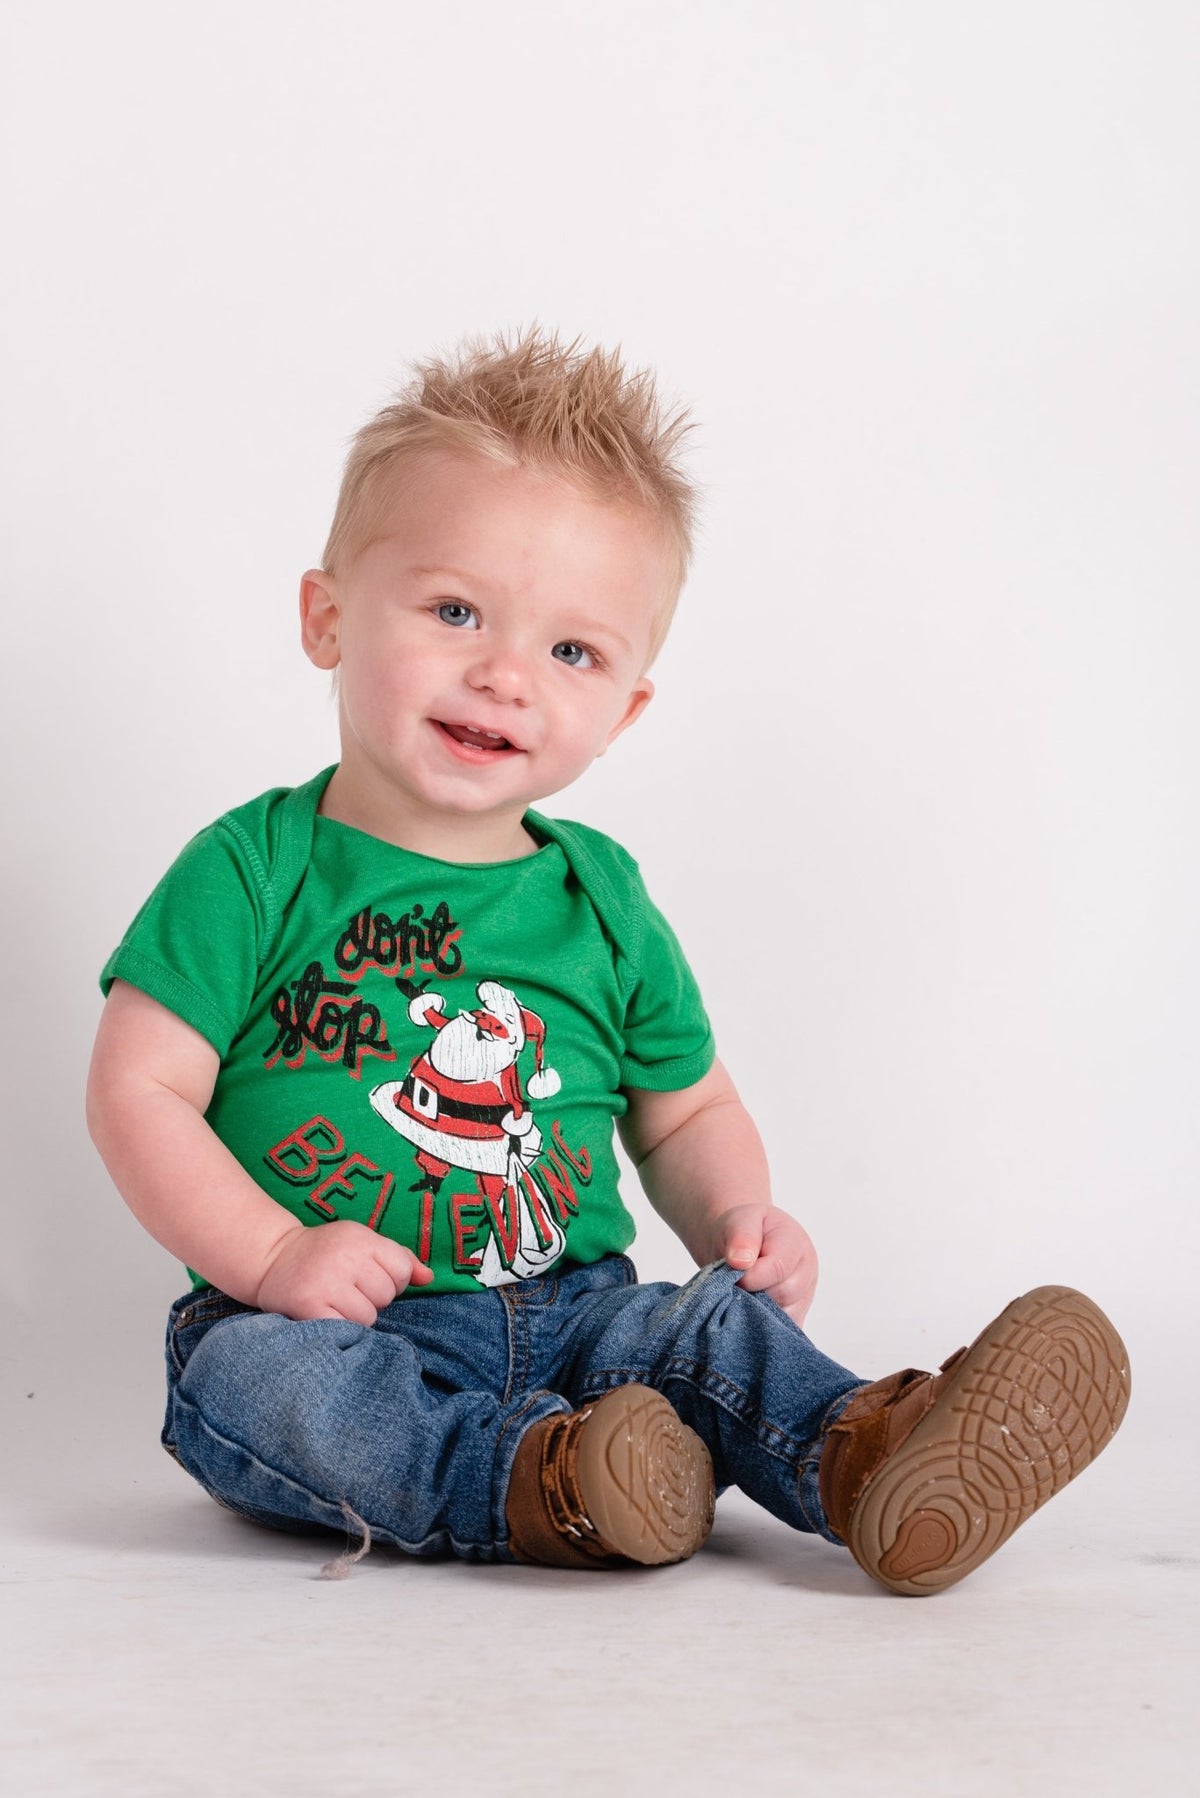 KIDS Don't stop believing onesie green - Cute Onesie - Trendy Kids Apparel at Lush Fashion Lounge Boutique in Oklahoma City